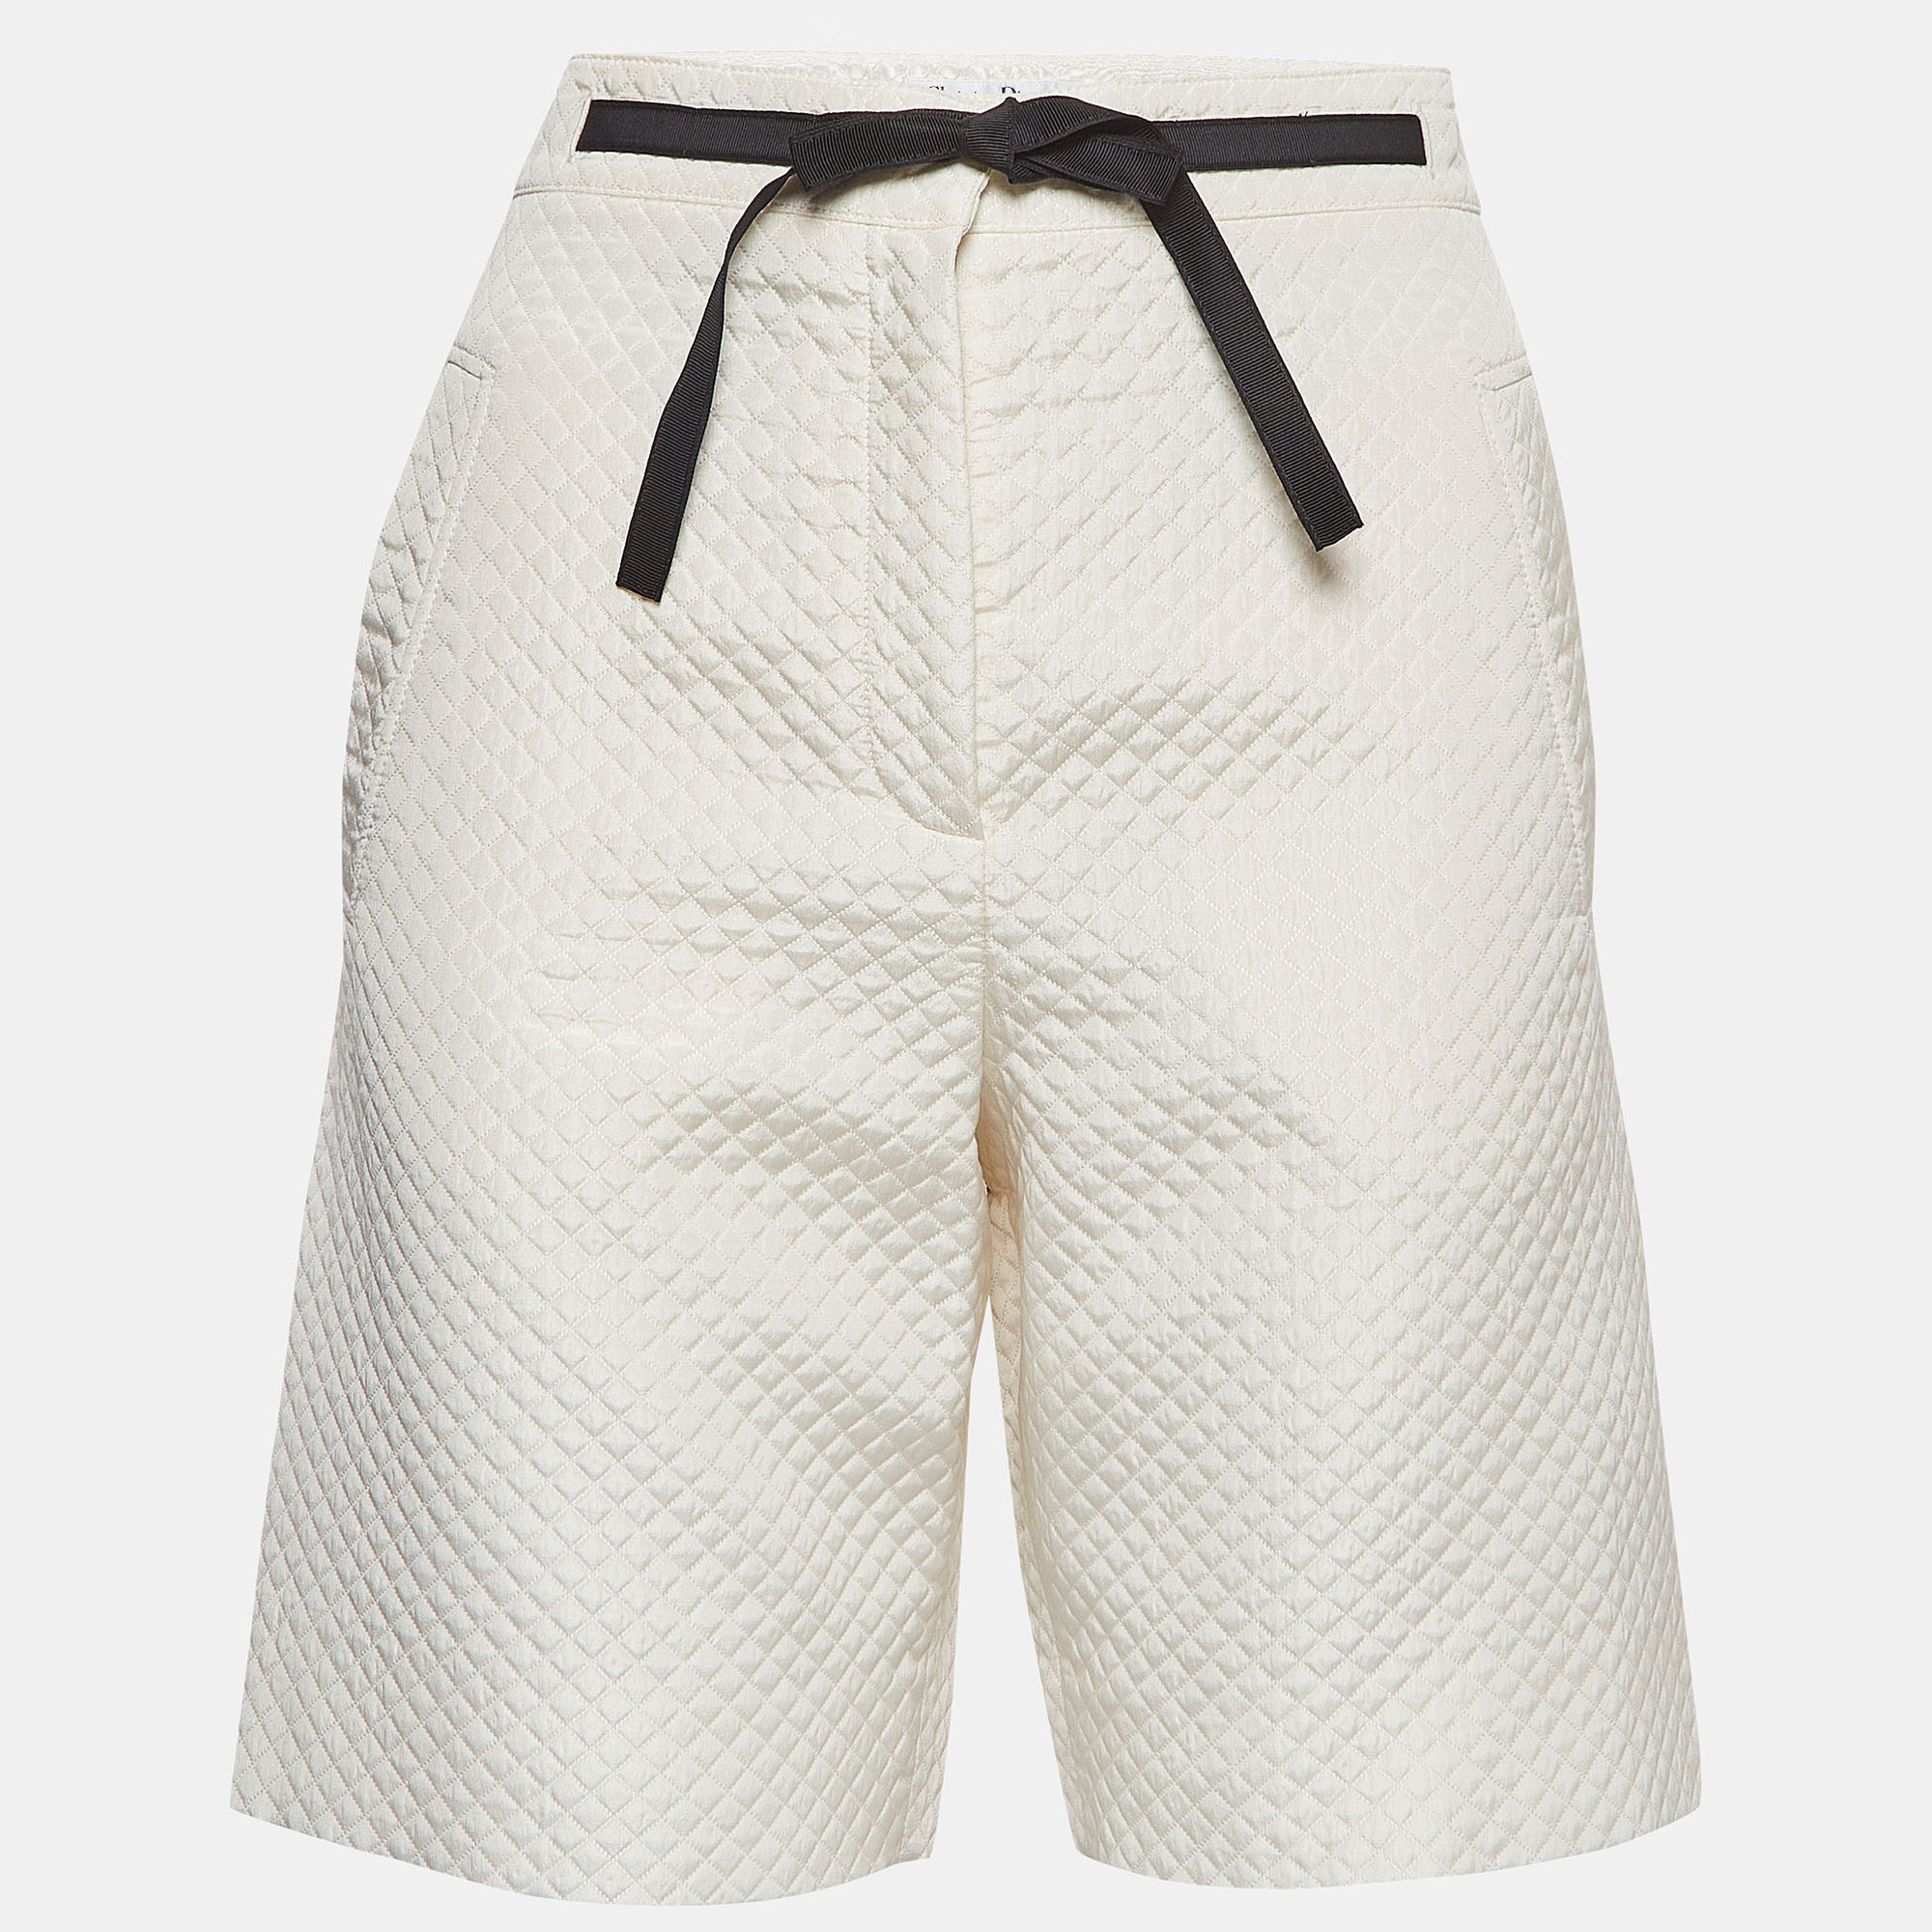 Relaxed days call for a pair of shorts like this. Stitched using high quality fabric these designer shorts are styled with classic details and have a superb length. Wear them with T shirts.